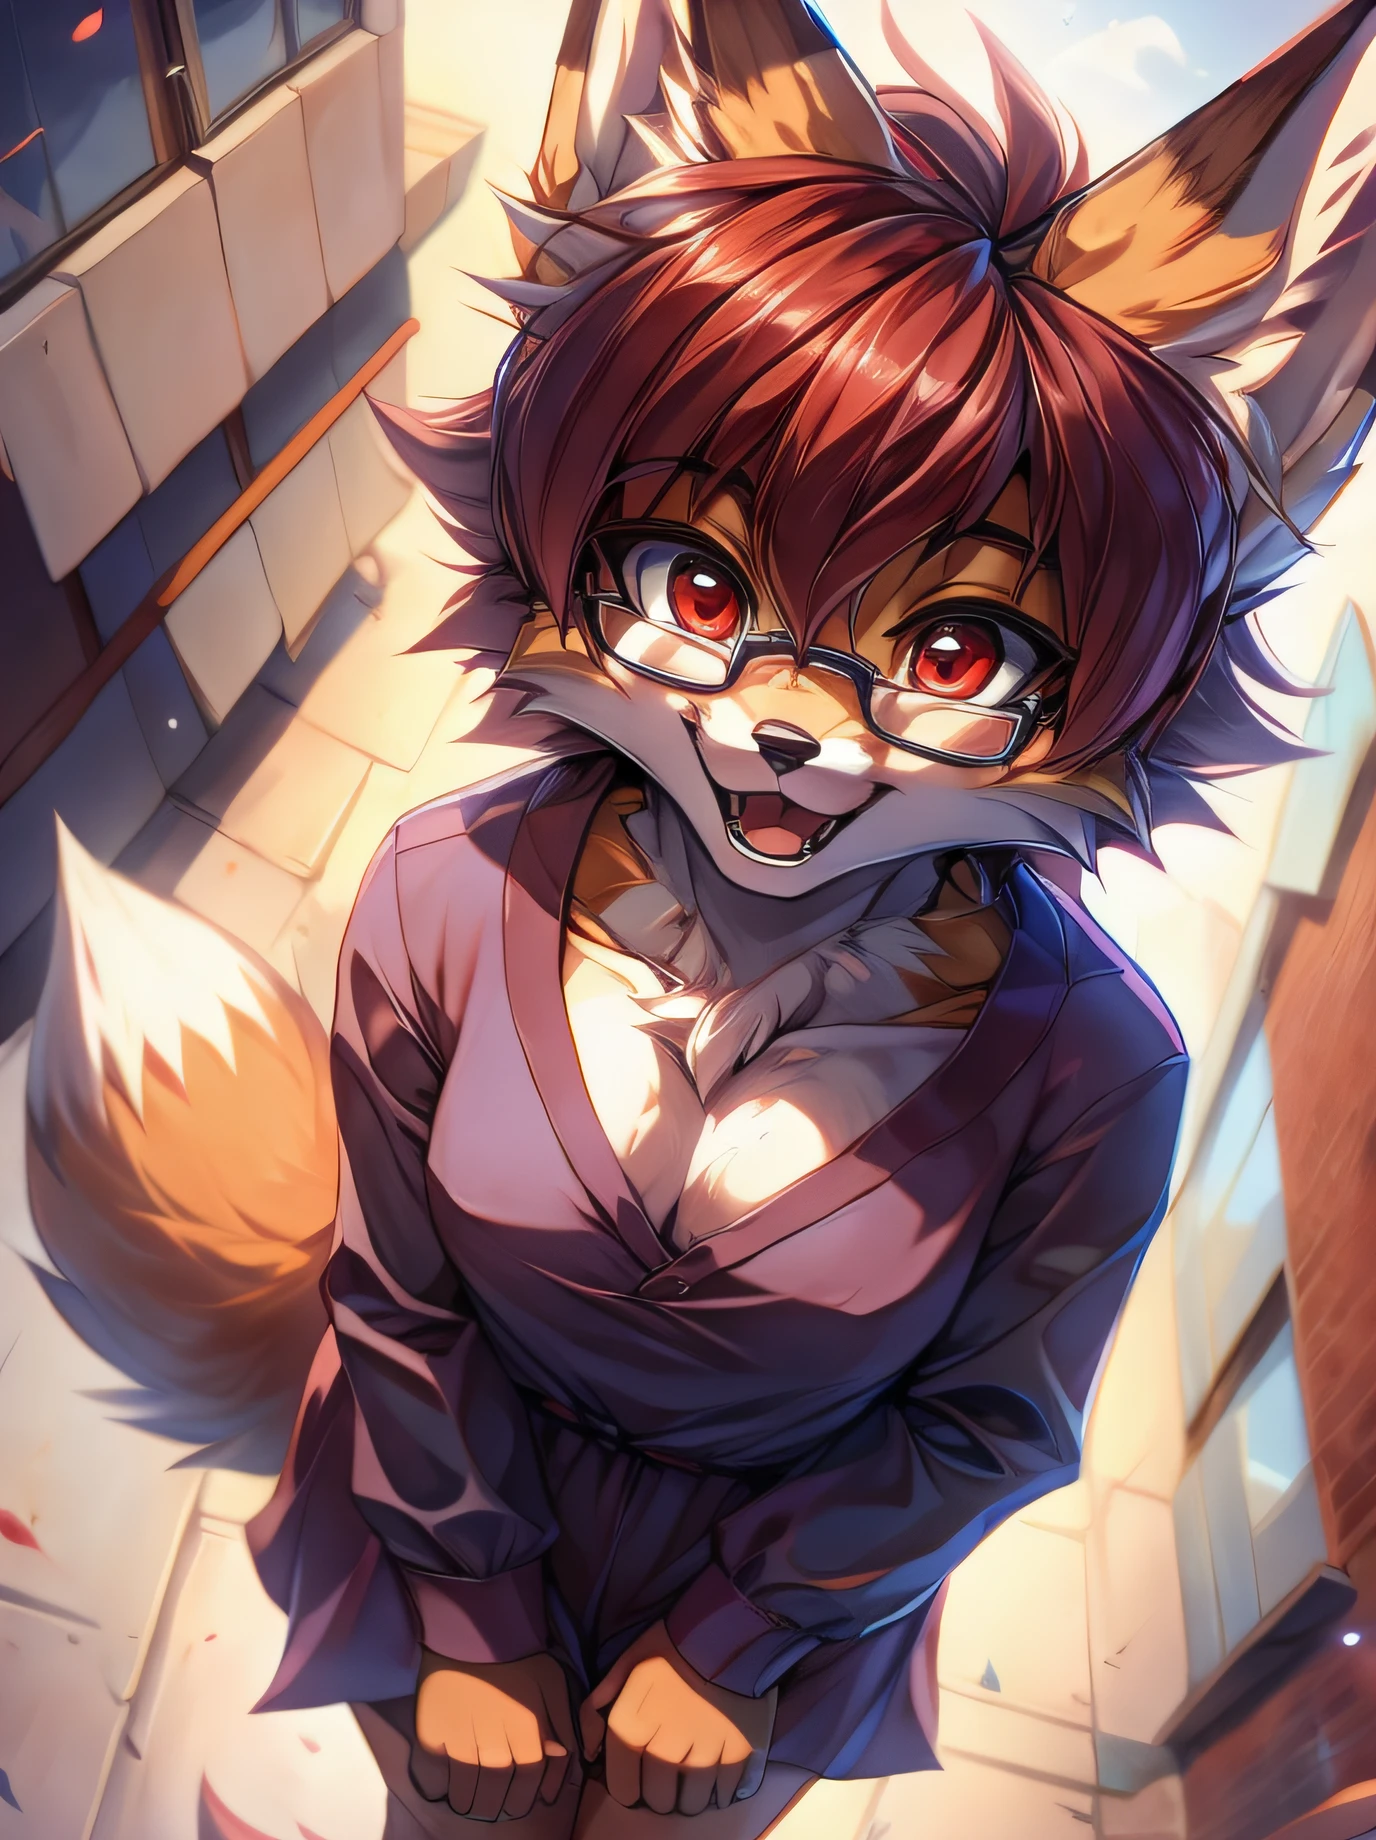 fox furry girl with short red hair, fluffy hair shy, beautiful red eyes, wearing glasses,  very  fluffy tail, , fluffy chest, 17 years old, happy , happy mouth, young body, Good girl, wearing a cute purple modest cute outfit, leaning over, walking in the streets, being adorable, proud girl, wanting to be loved, low perspective, side perspective